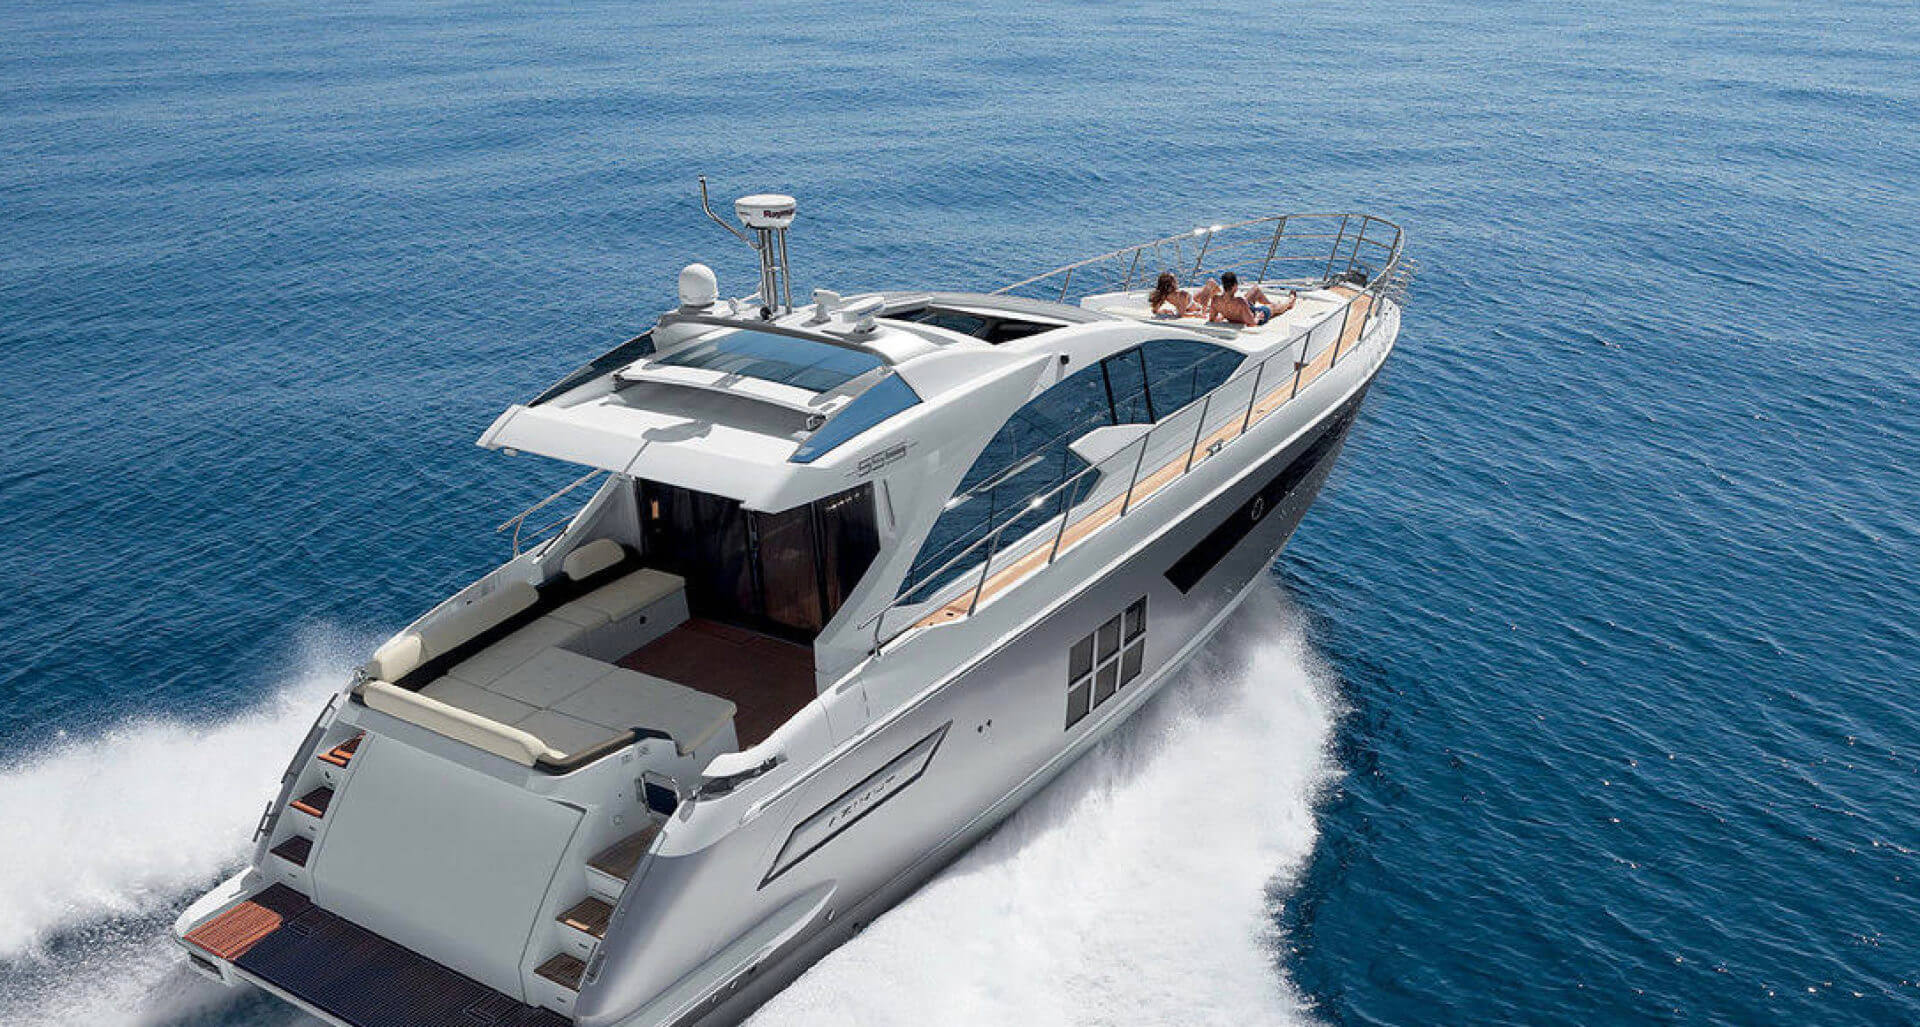 LUXURIA LIFESTYLE WELCOMES RESIDENCE YACHT CLUB FROM MIAMI, FLORIDA